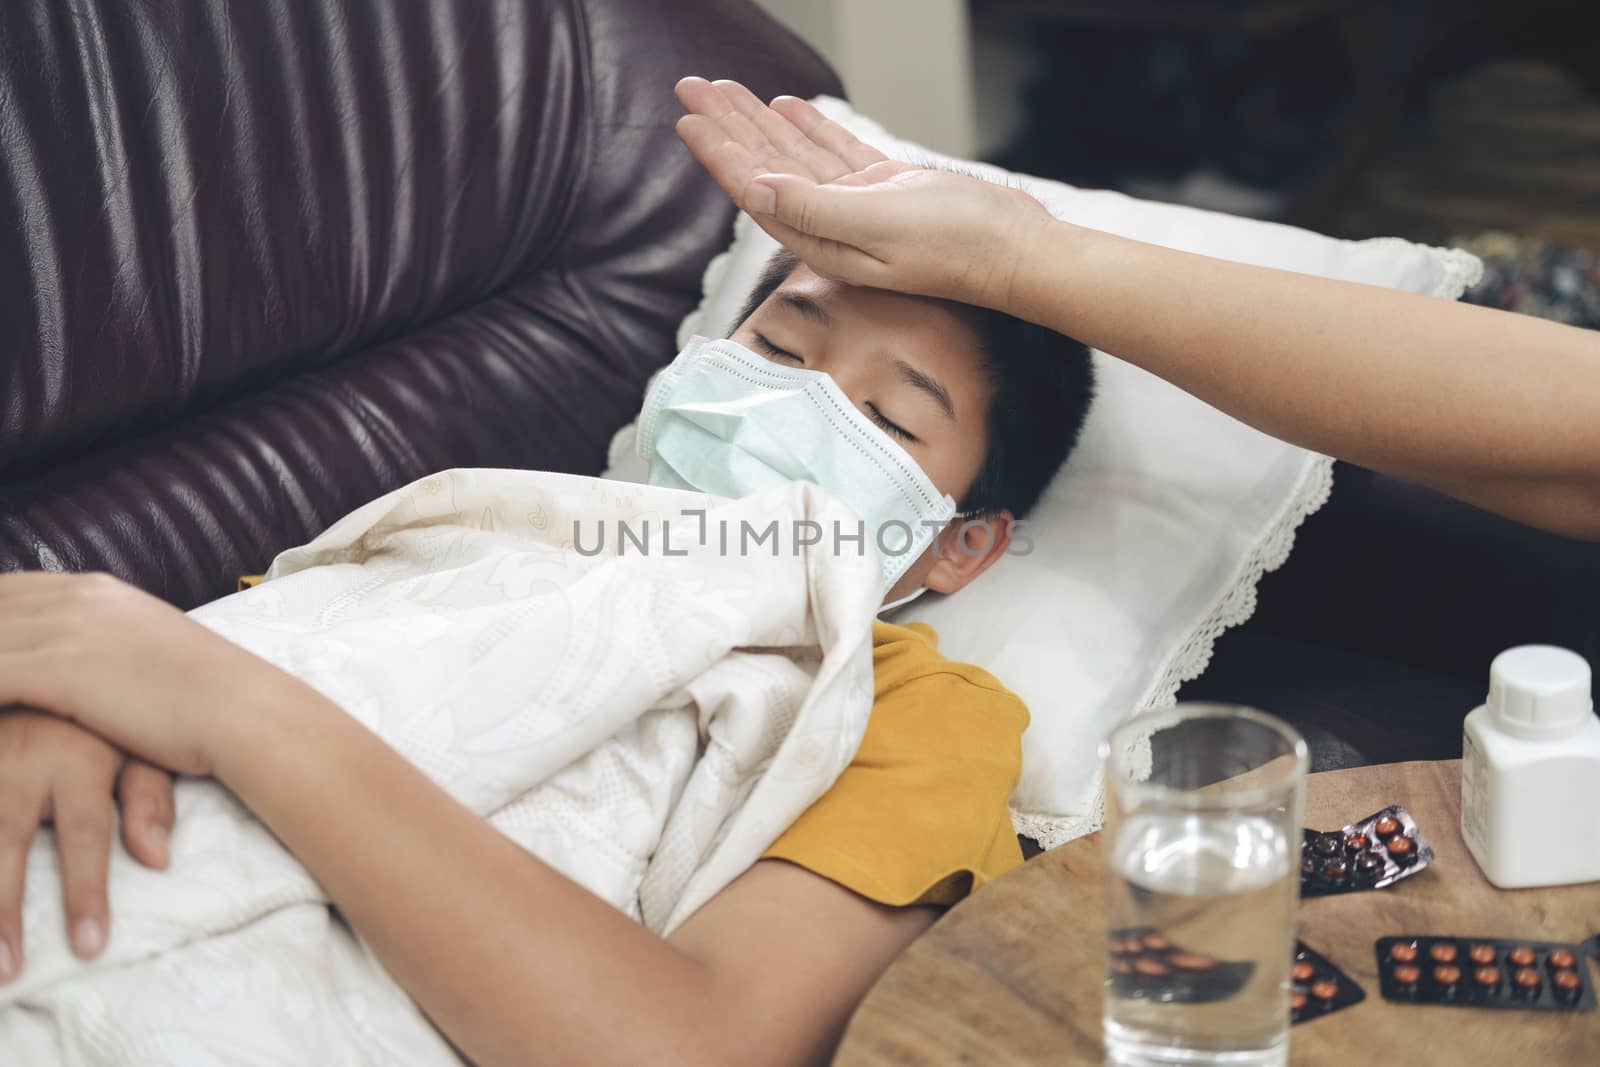 Sick child lying in sofa bed with protection mask on face against infection.